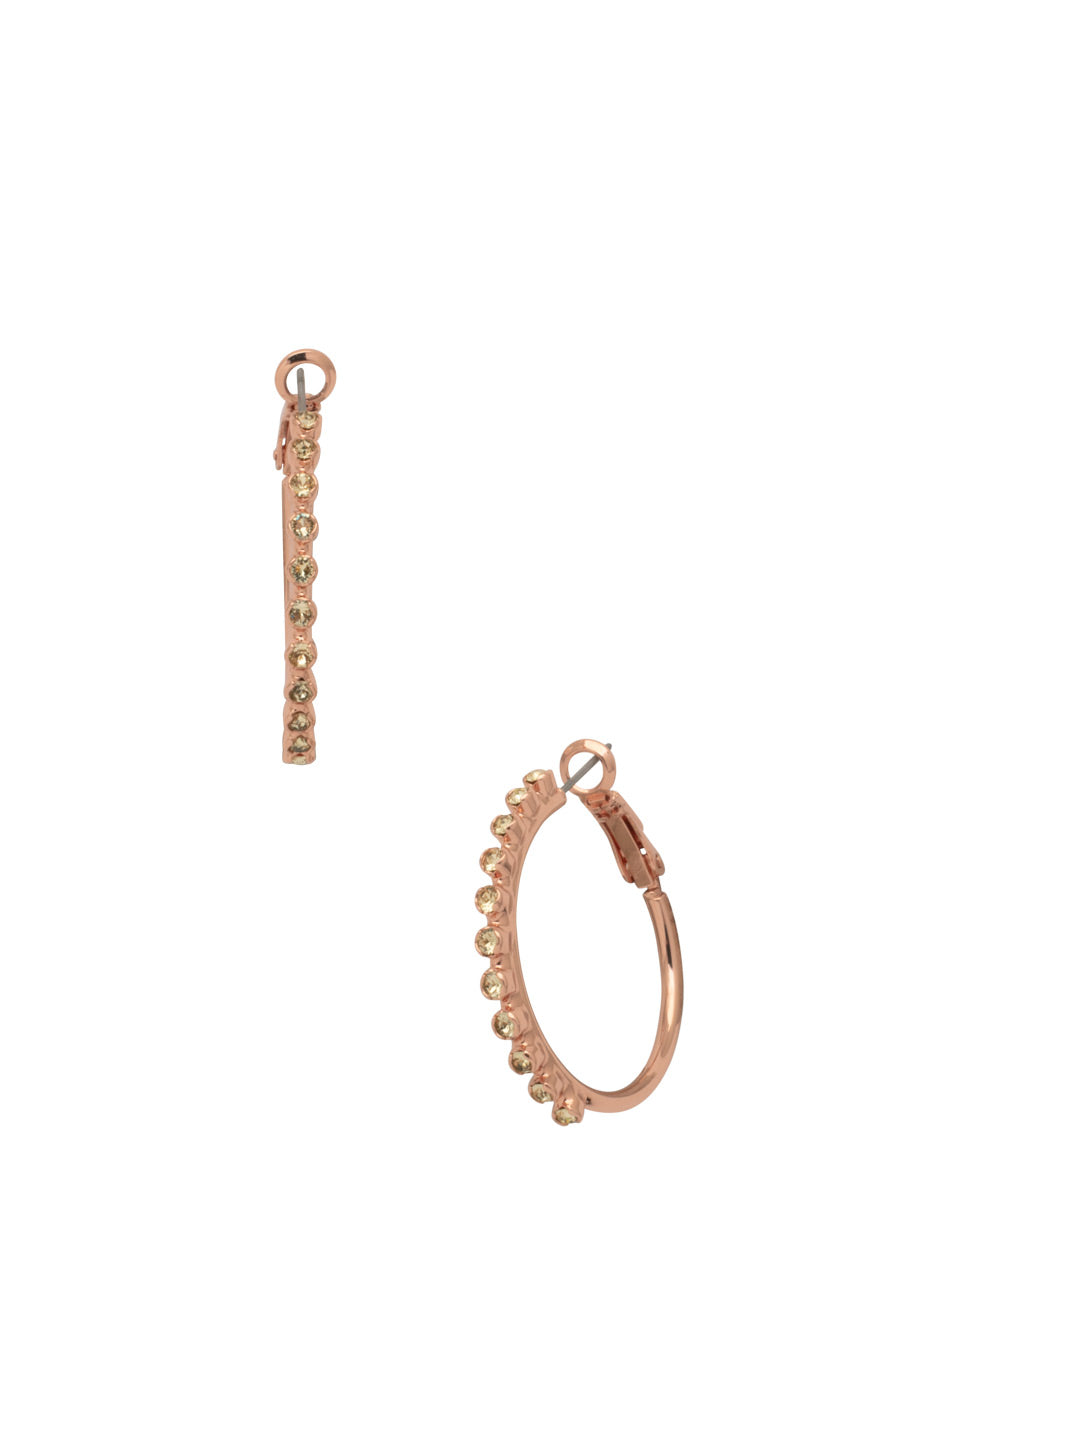 Tyra Hoop Earrings - EFF41RGPPN - <p>The Trya Hoop Earrings feature a row of crystals on a classic metal hoop. From Sorrelli's Pink Pineapple collection in our Rose Gold-tone finish.</p>